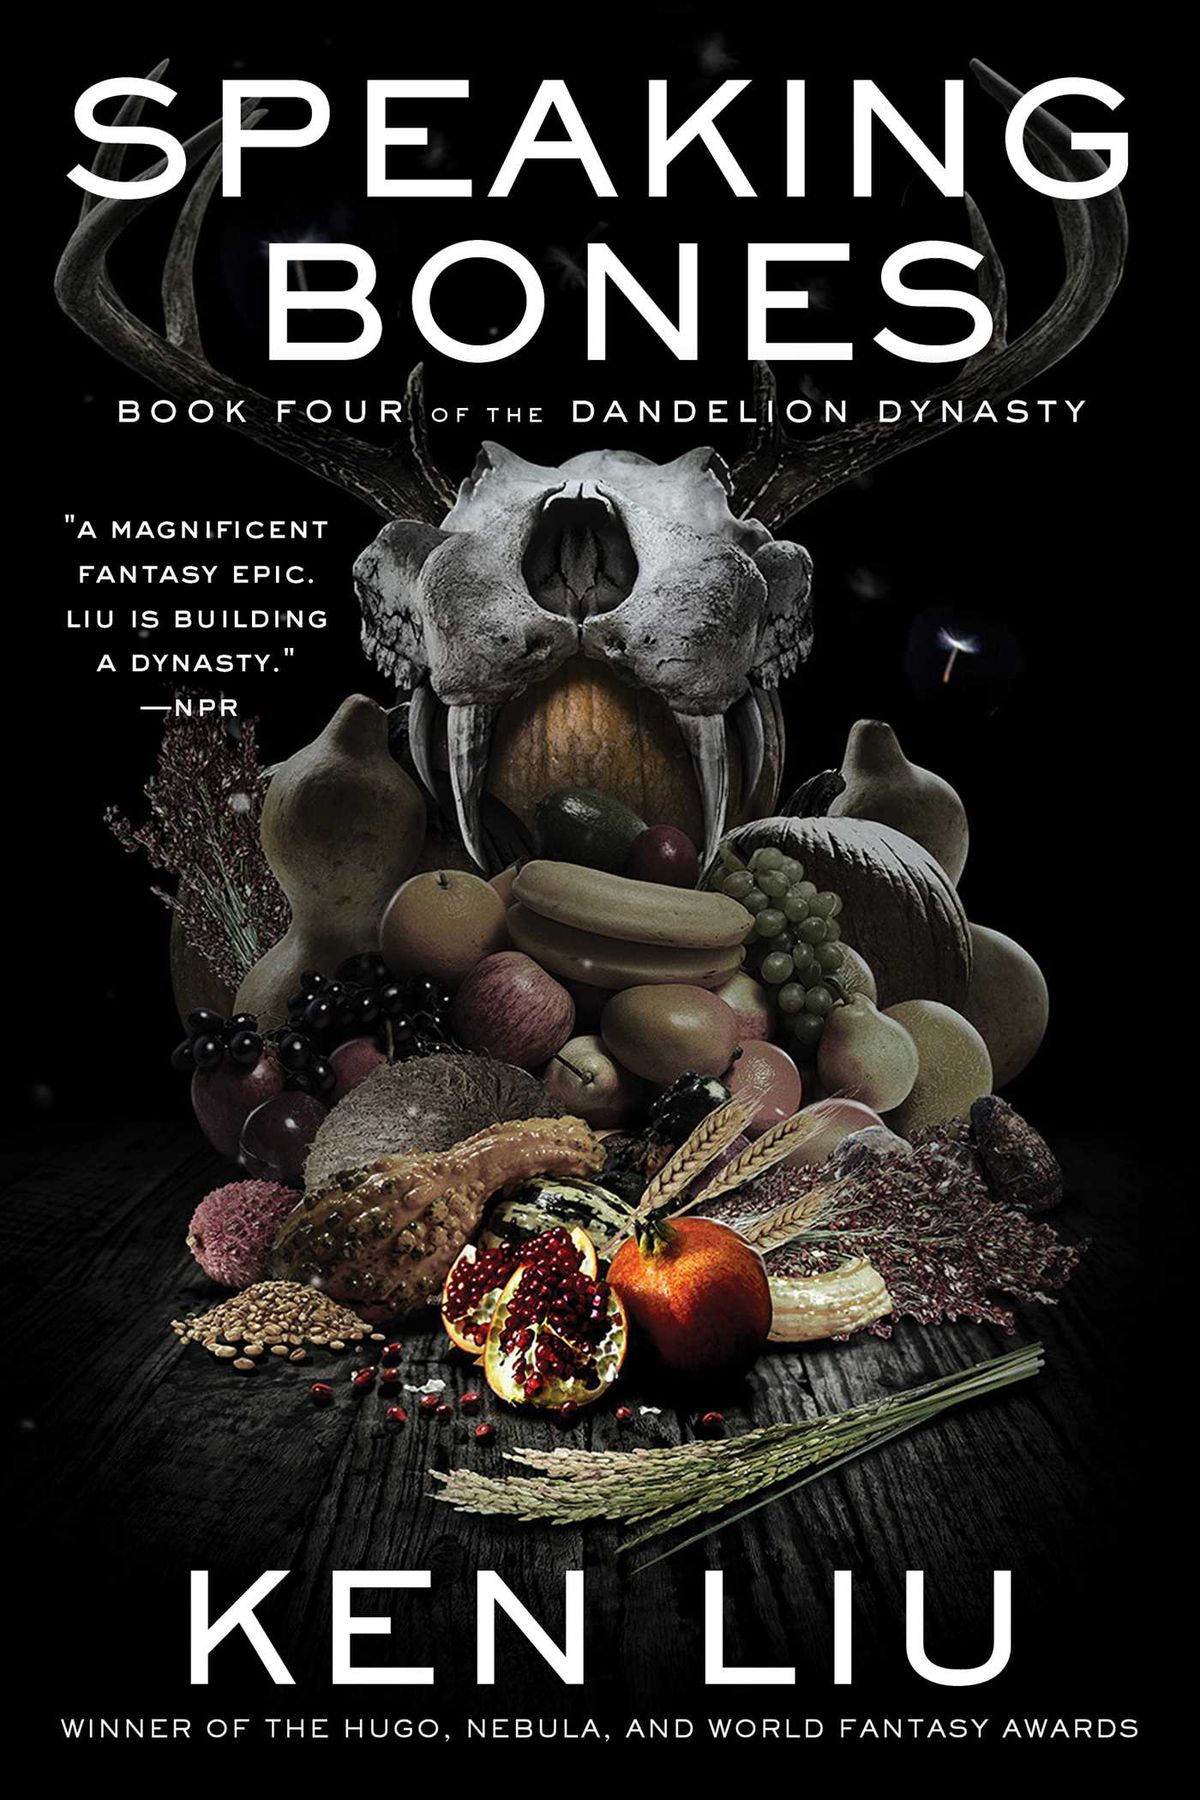 The cover for Speaking Bones showing a feast on a table, with and a skull with antlers at the back